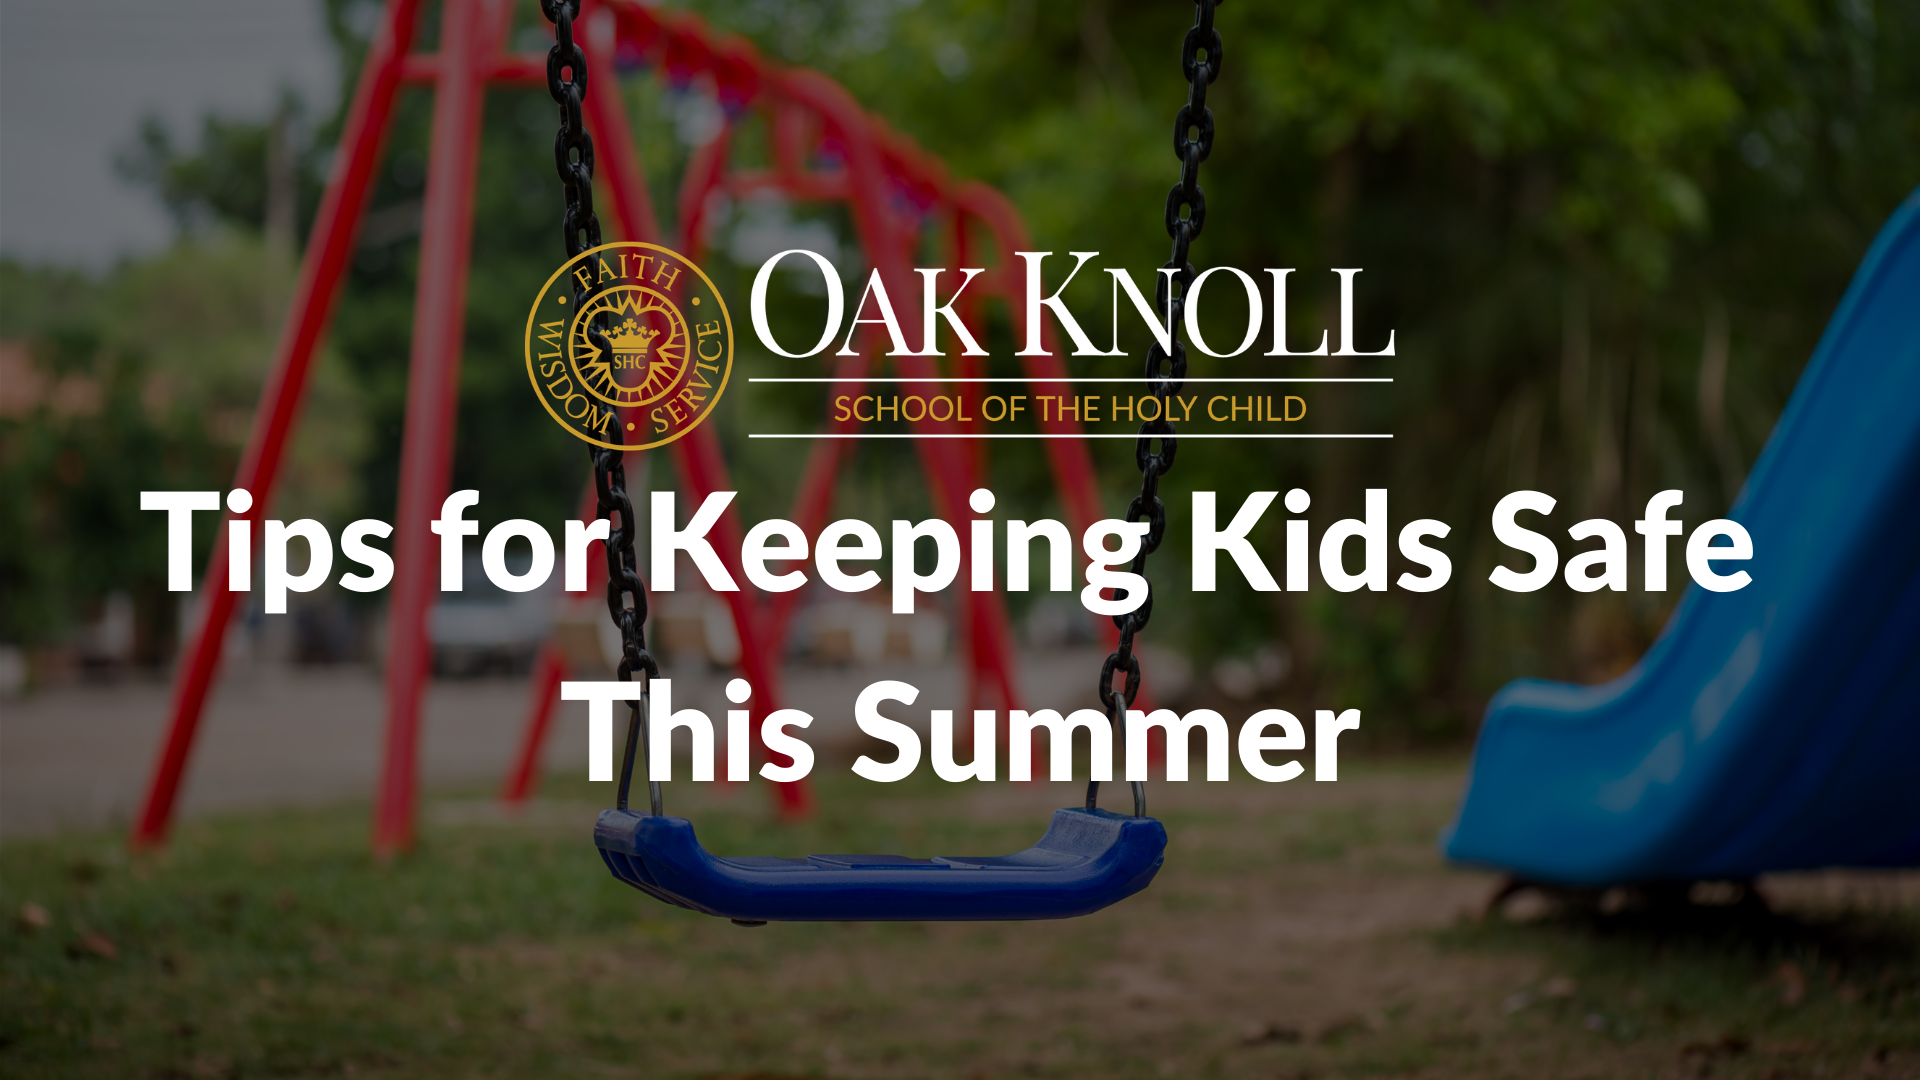 Tips for Keeping Kids Safe This Summer